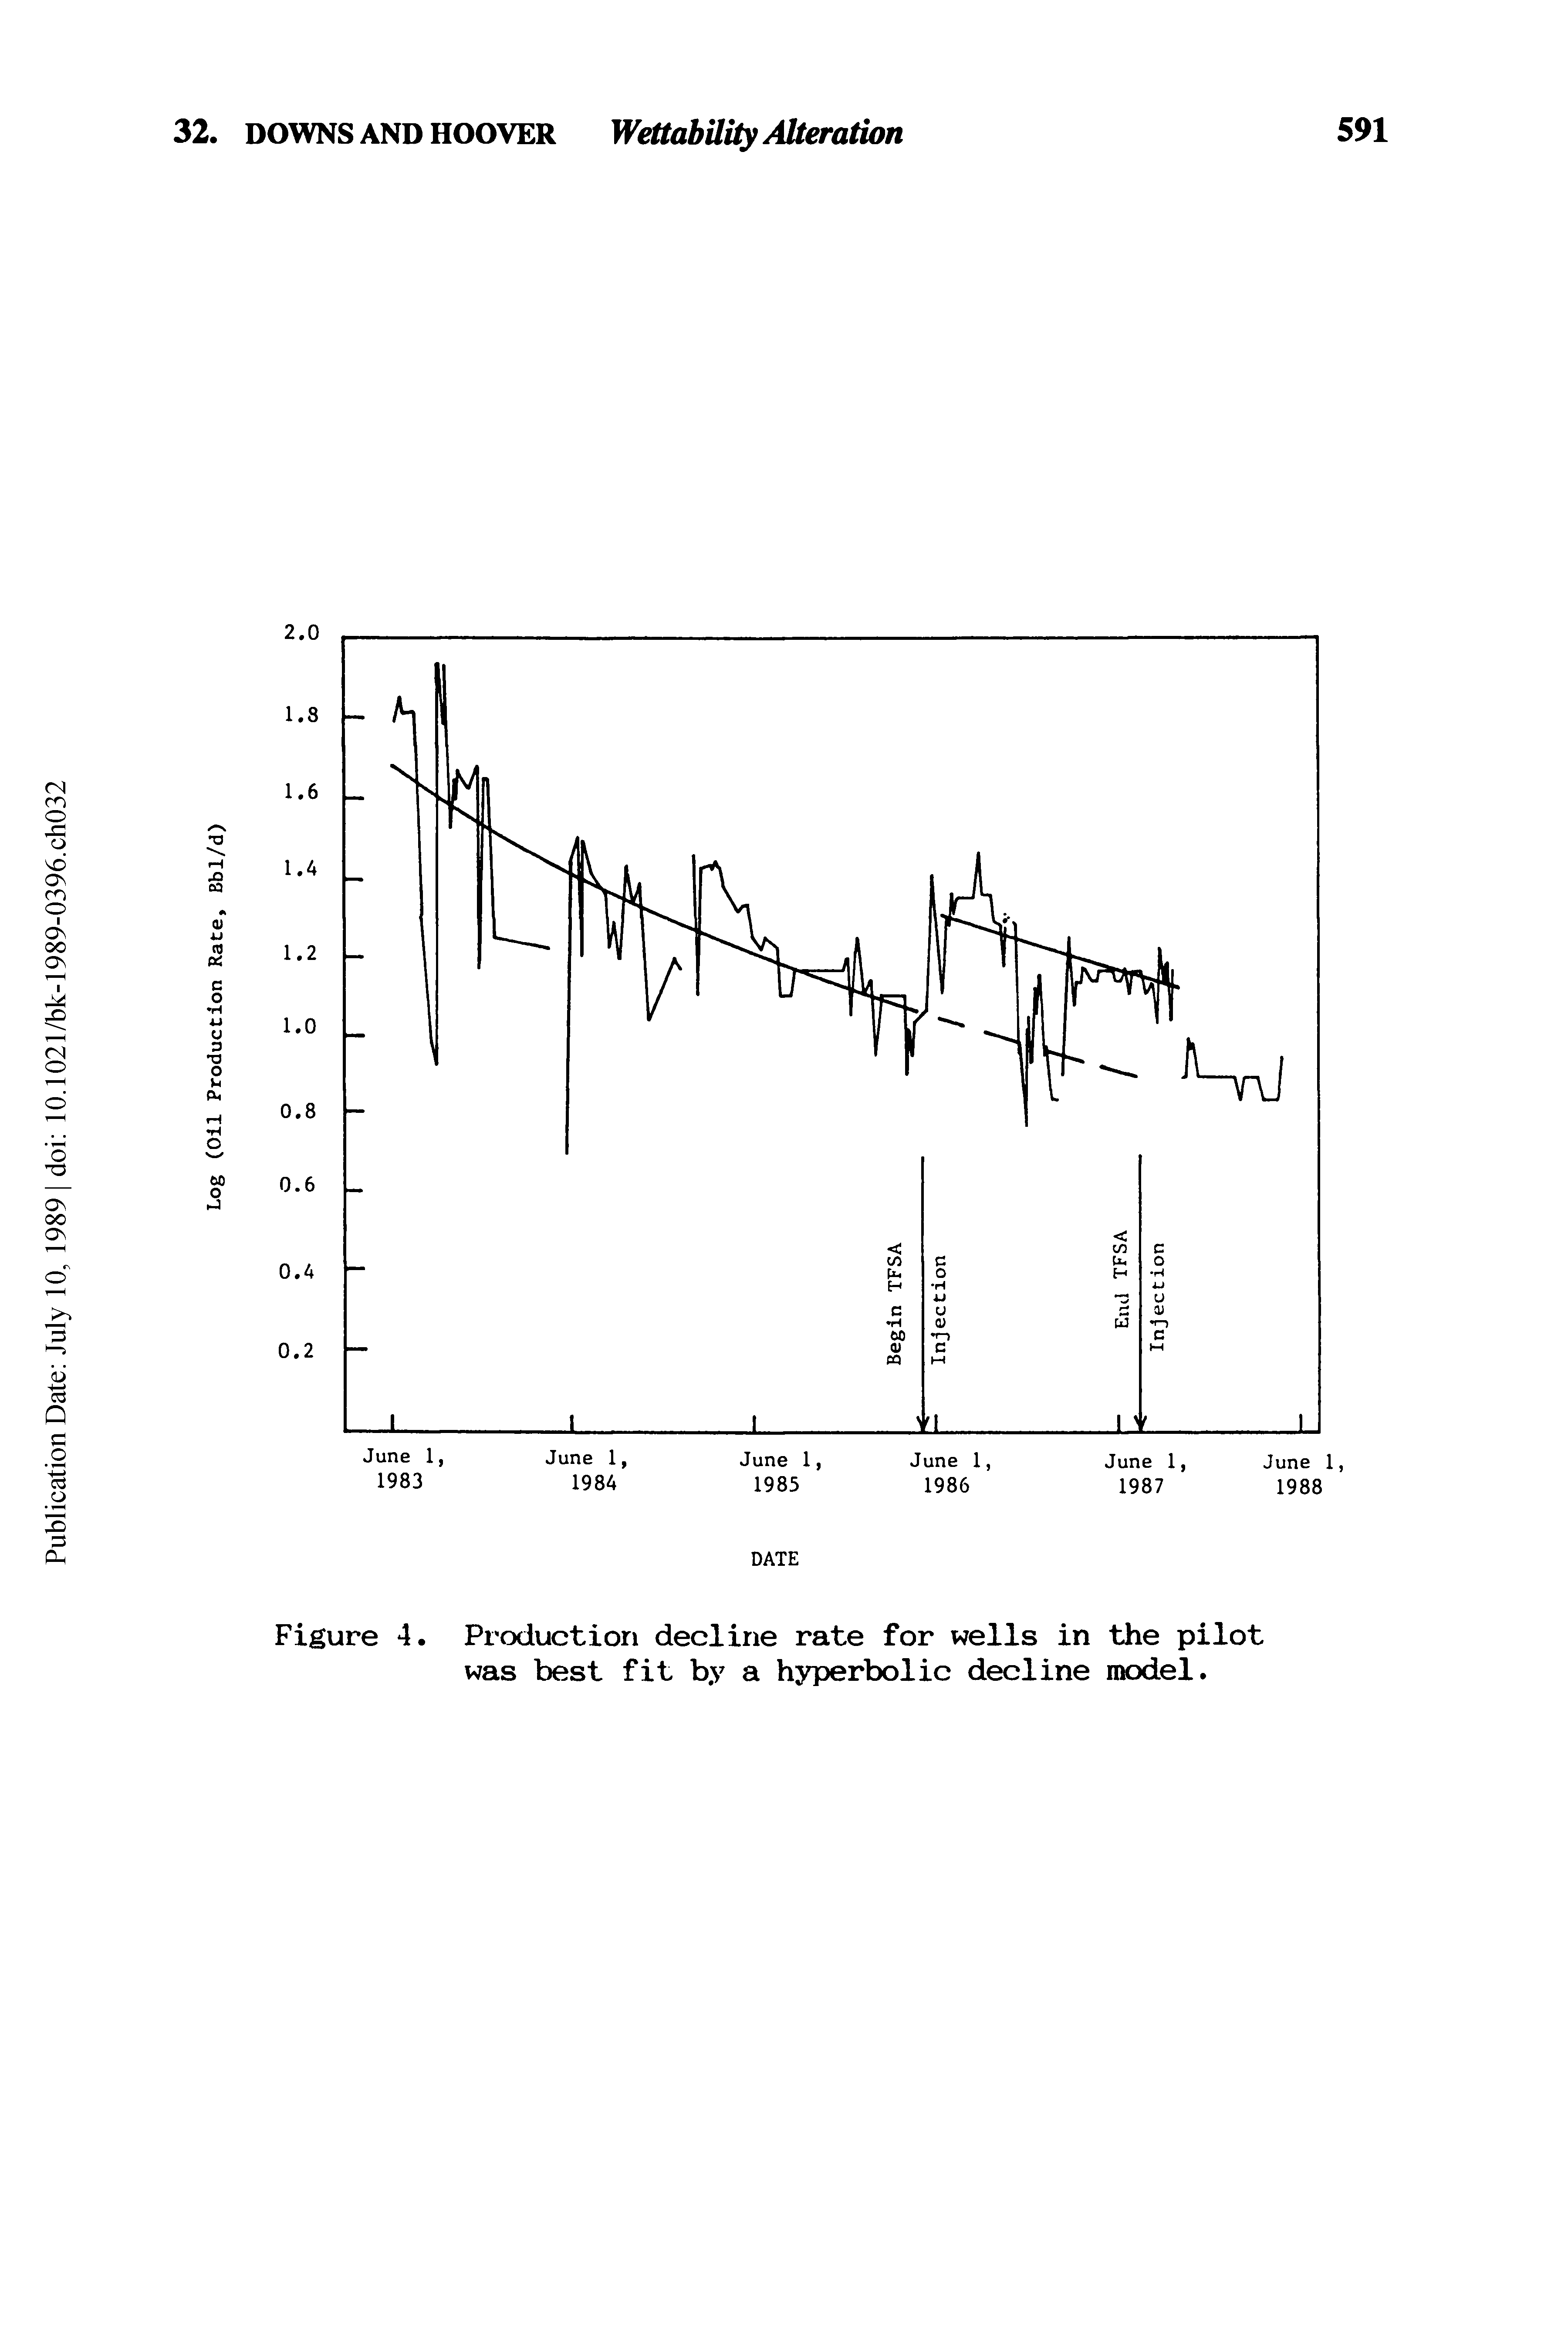 Figure 4. Production decline rate for wells in the pilot was best fit by a hyperbolic decline model.